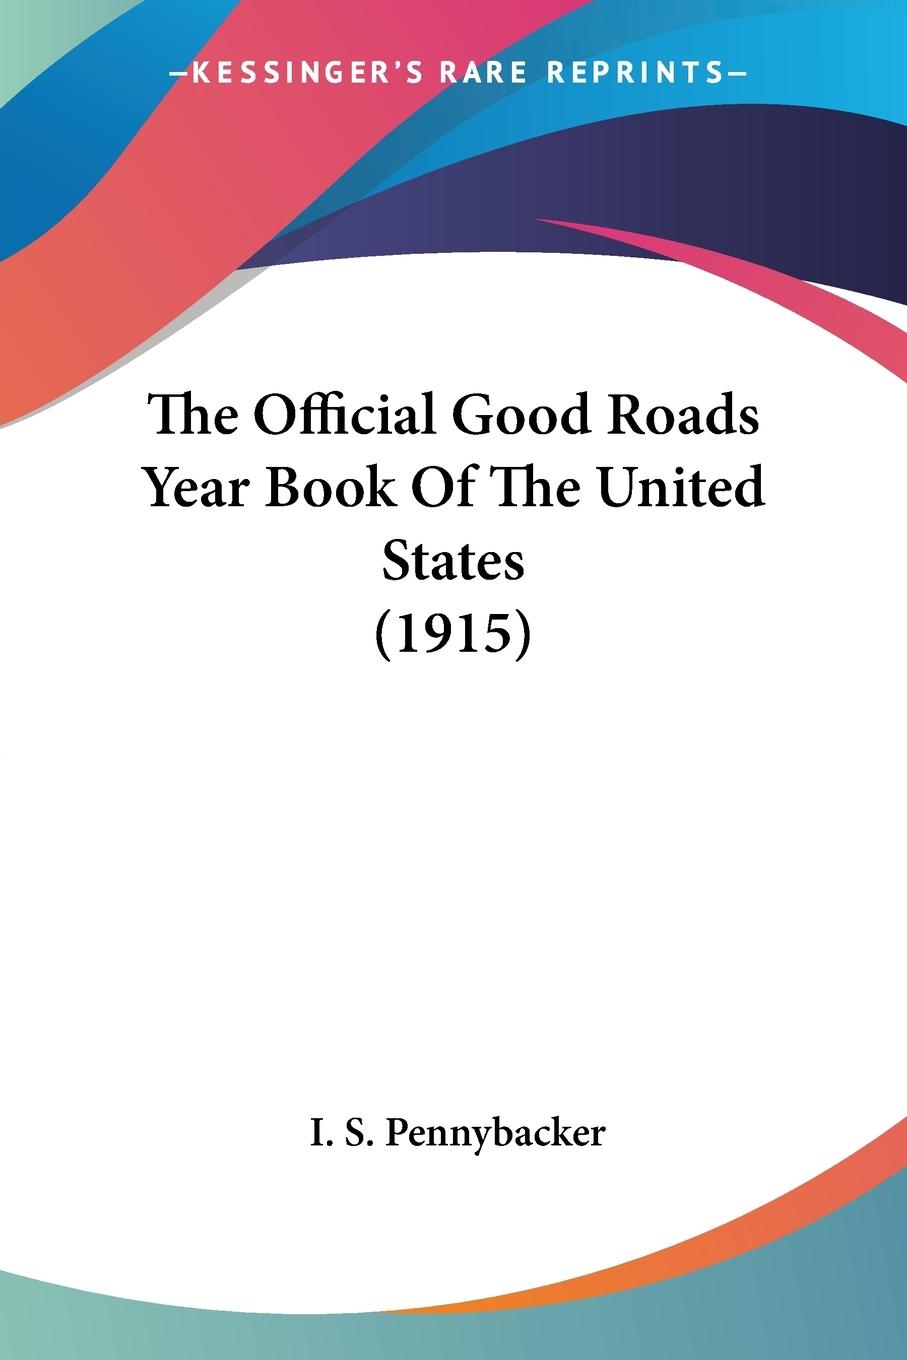 The Official Good Roads Year Book Of The United States (1915)